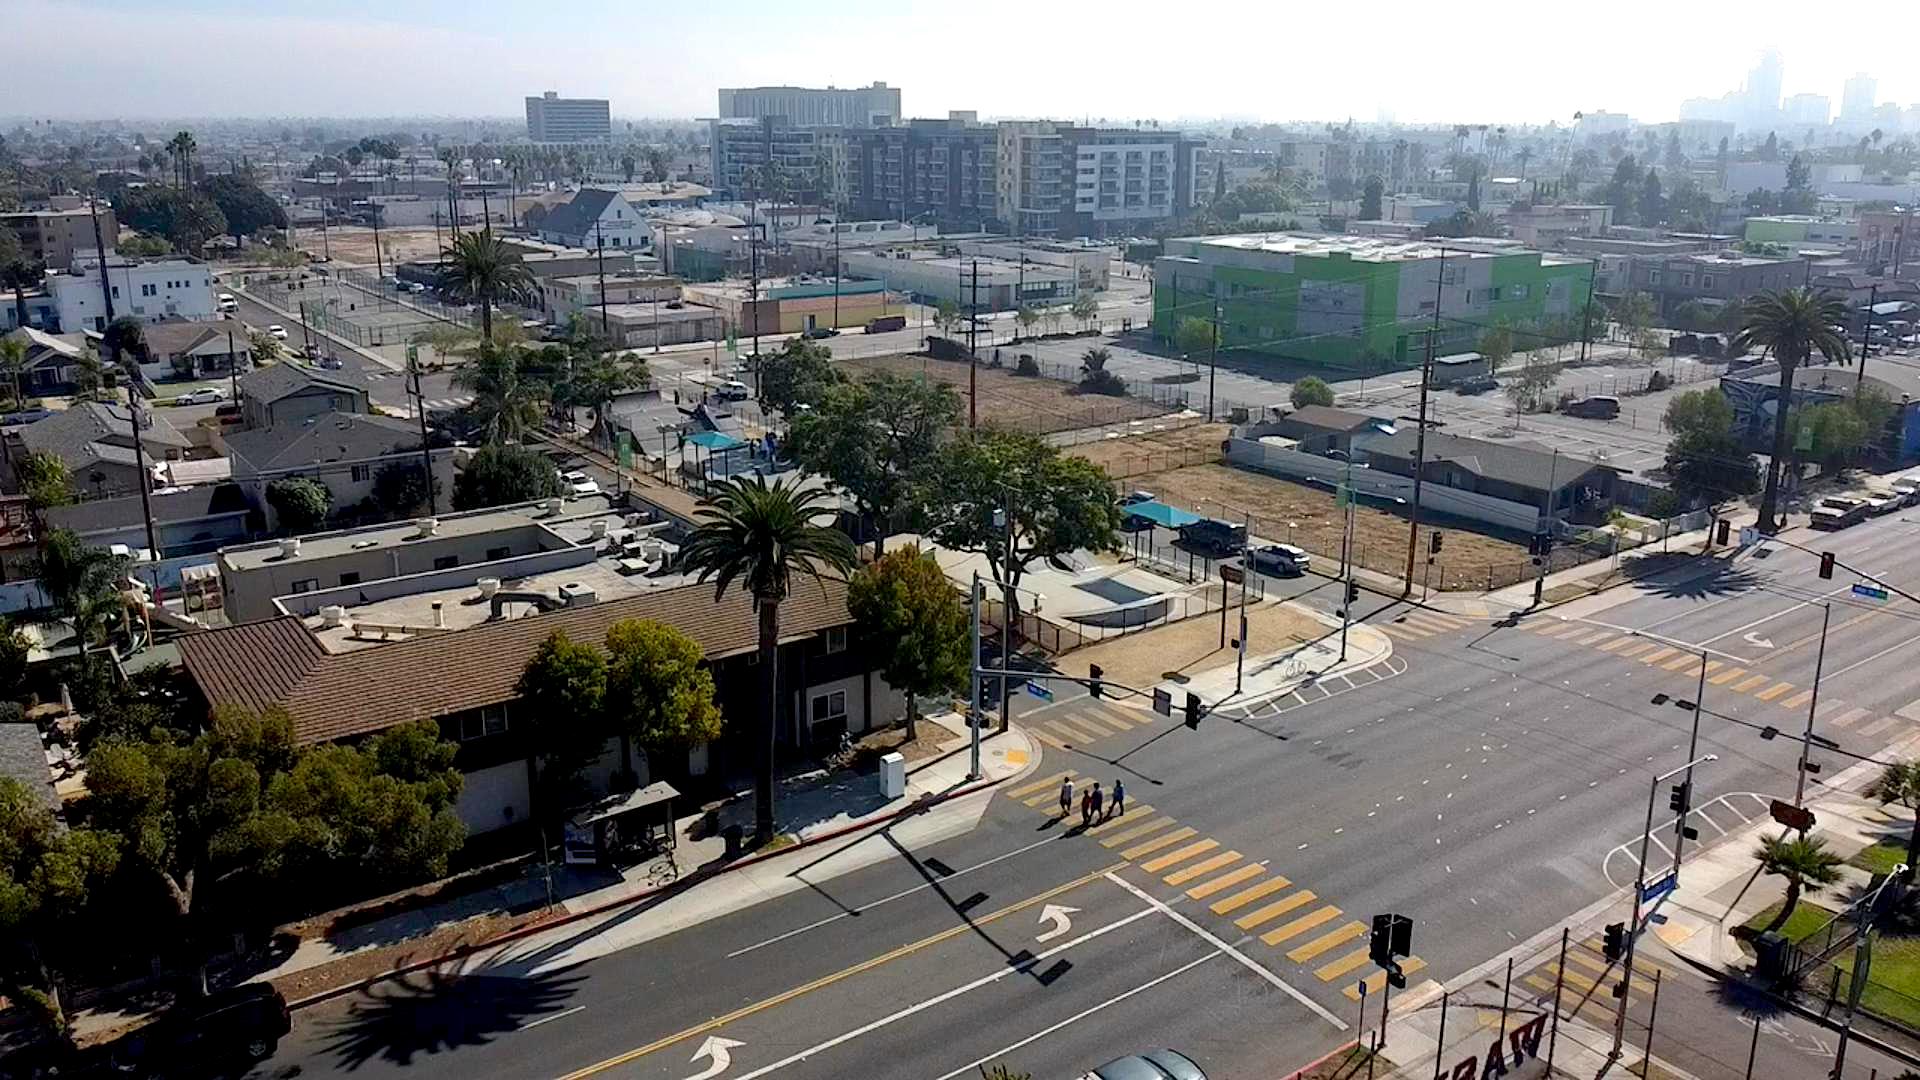 Film clip from a video by Prairieform's John Kamp on how to contribute to a virtual walking tour in the Washington Neighborhood of Long Beach.